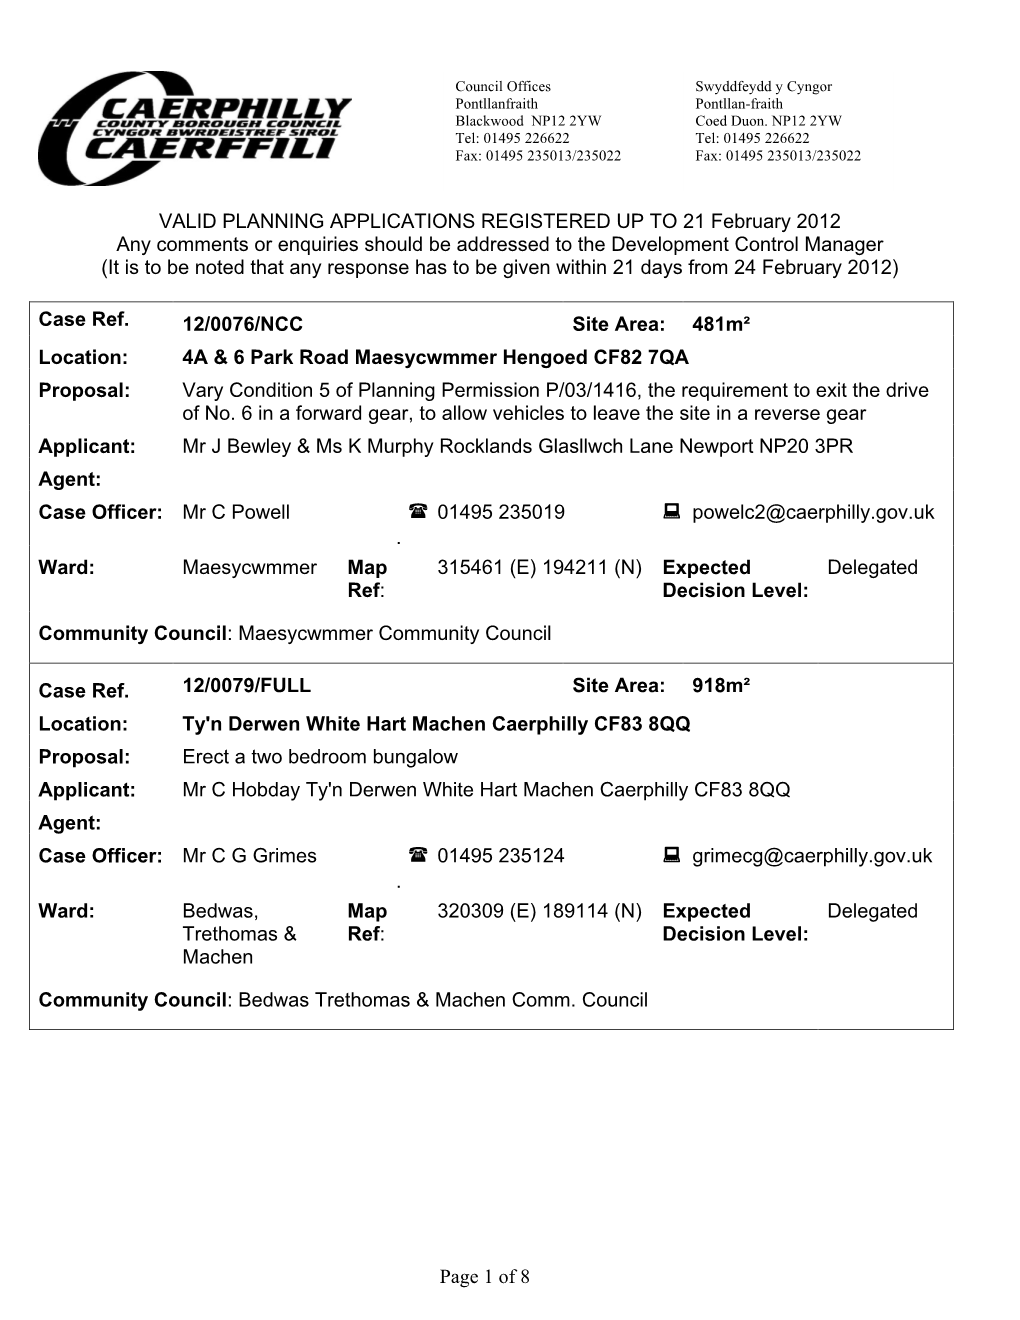 Page 1 of 8 VALID PLANNING APPLICATIONS REGISTERED up to 21 February 2012 Any Comments Or Enquiries Should Be Addressed to the D